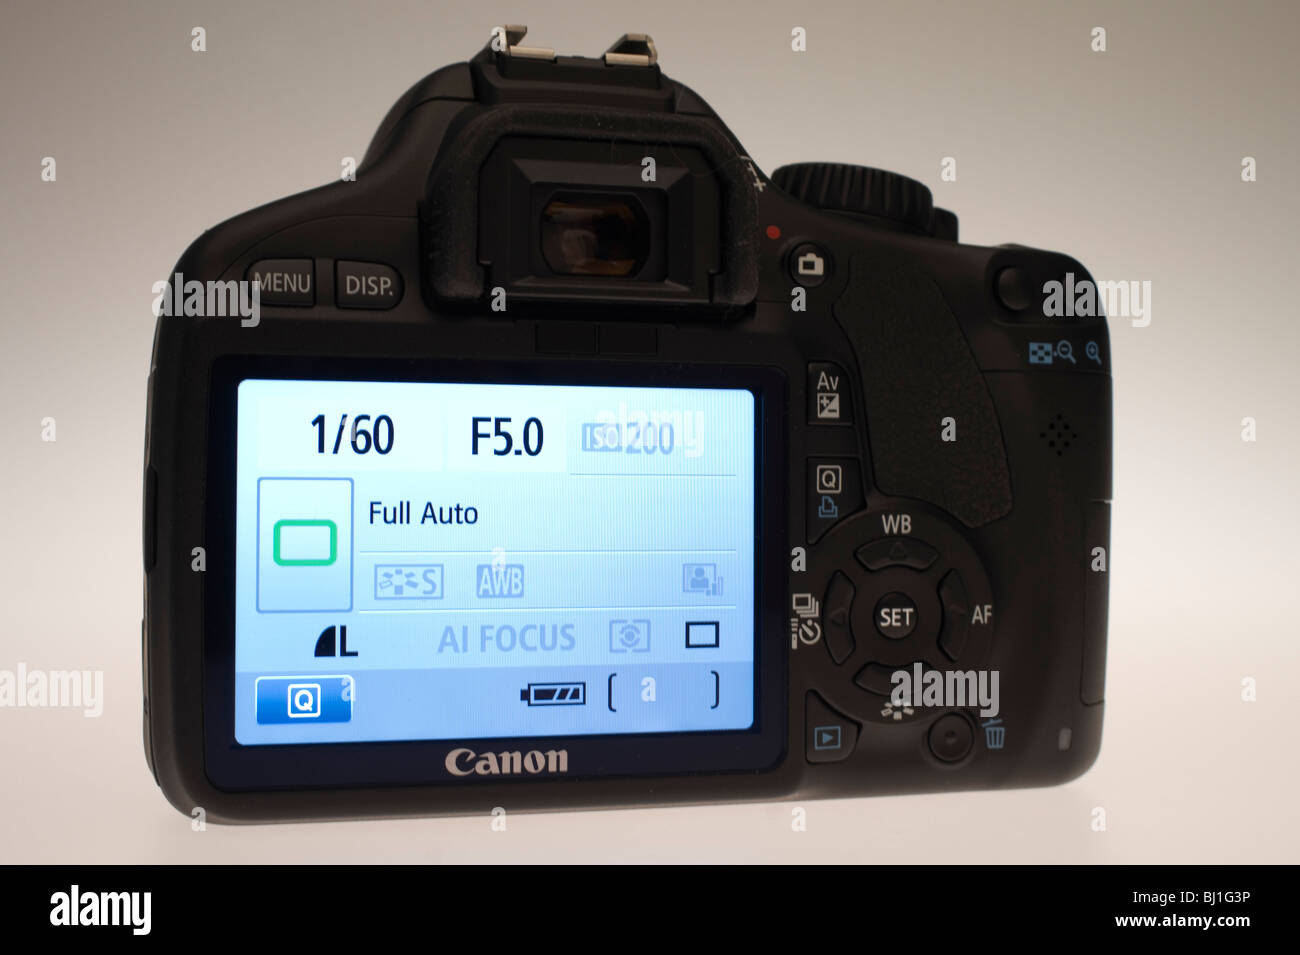 Canon EOS 550D or Digital Rebel 2Ti digital SLR camera with movie function March 2010. Rear 3 inch LCD showing user interface. Stock Photo